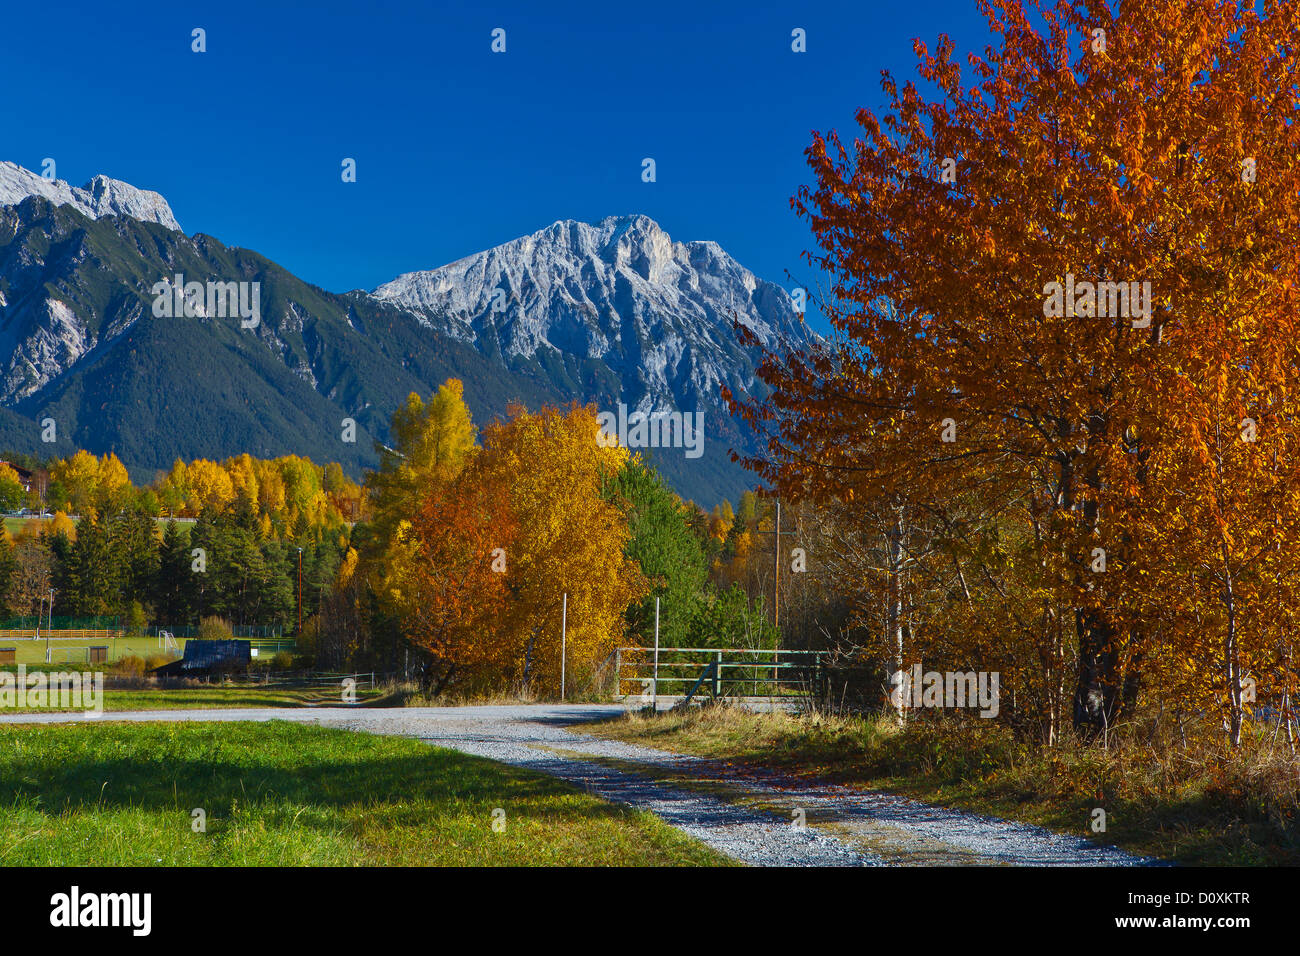 Austria, Europe, Tyrol, Tirol, Mieming, chain, plateau, Obsteig, autumn, trees, colorful, mountain, rest, rest, Mieming, chain, Stock Photo